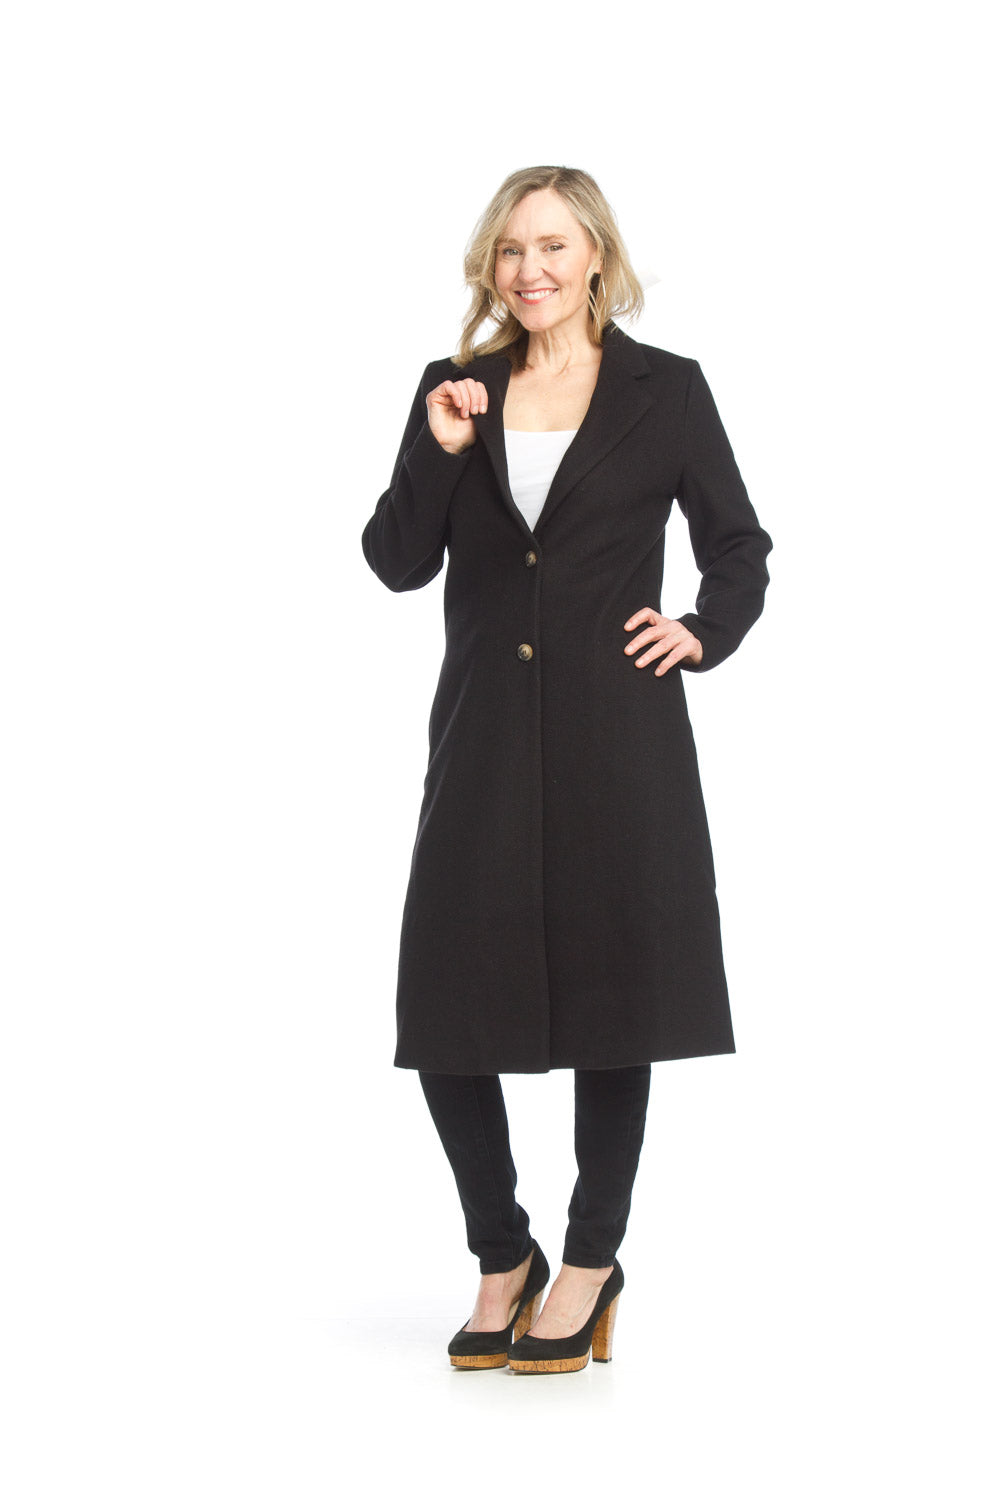 JT-13751 - Lapel Single Breasted Coat with Pockets